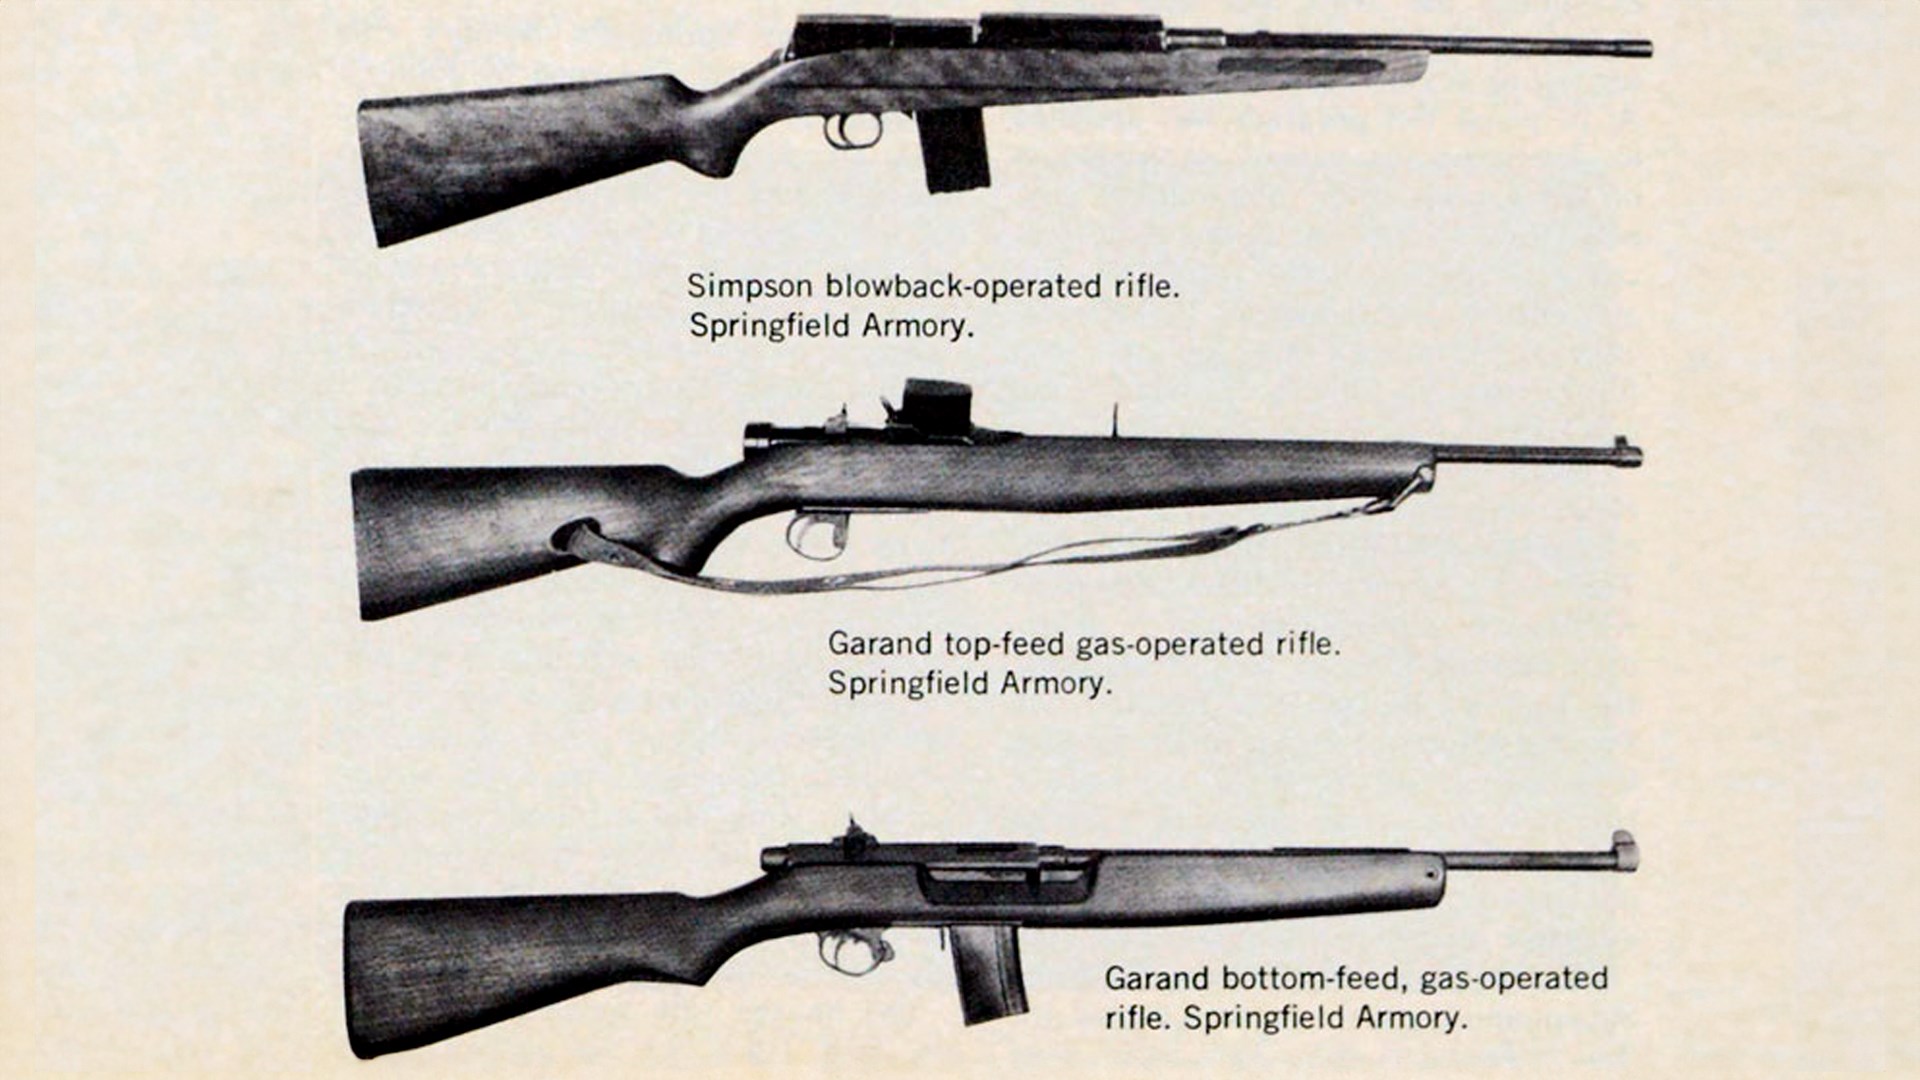 Right-side view stack of semi-automatic prototype rifles three guns SPRINGFIELD ARMORY